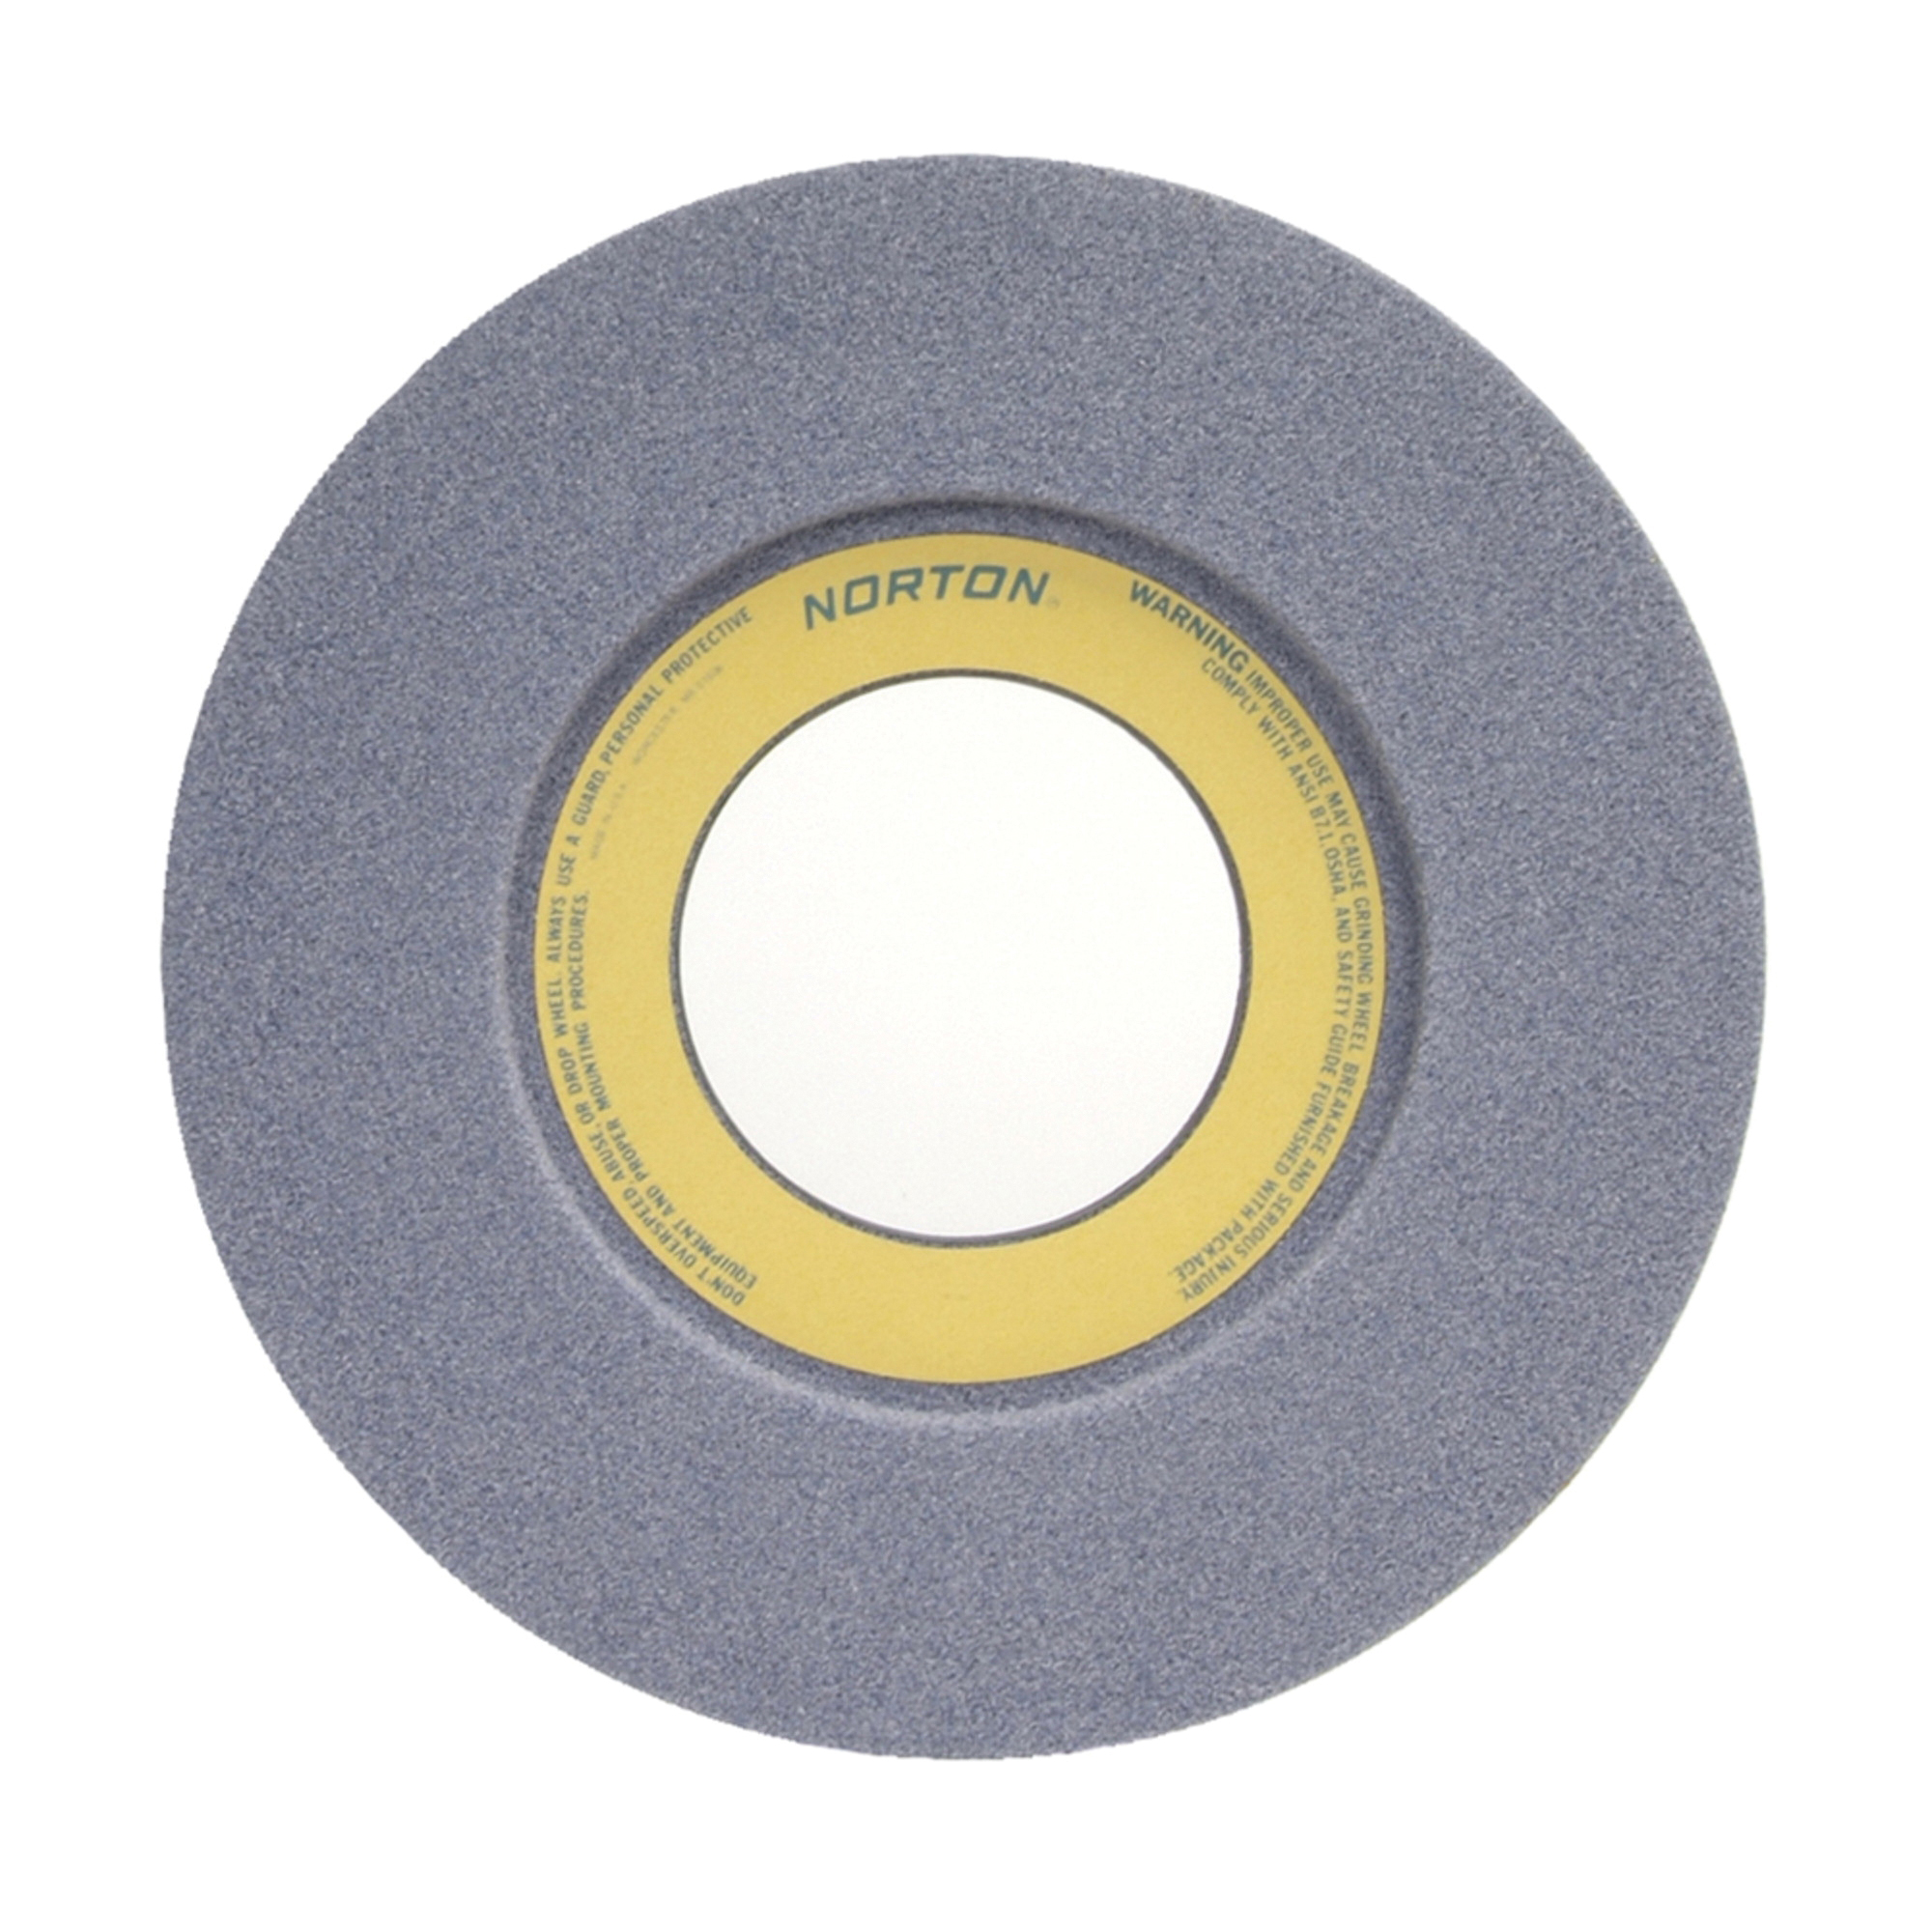 Norton® 66253364359 32A 1-Side Recessed Toolroom Wheel, 14 in Dia x 1-1/2 in THK, 5 in Center Hole, 46 Grit, Aluminum Oxide Abrasive